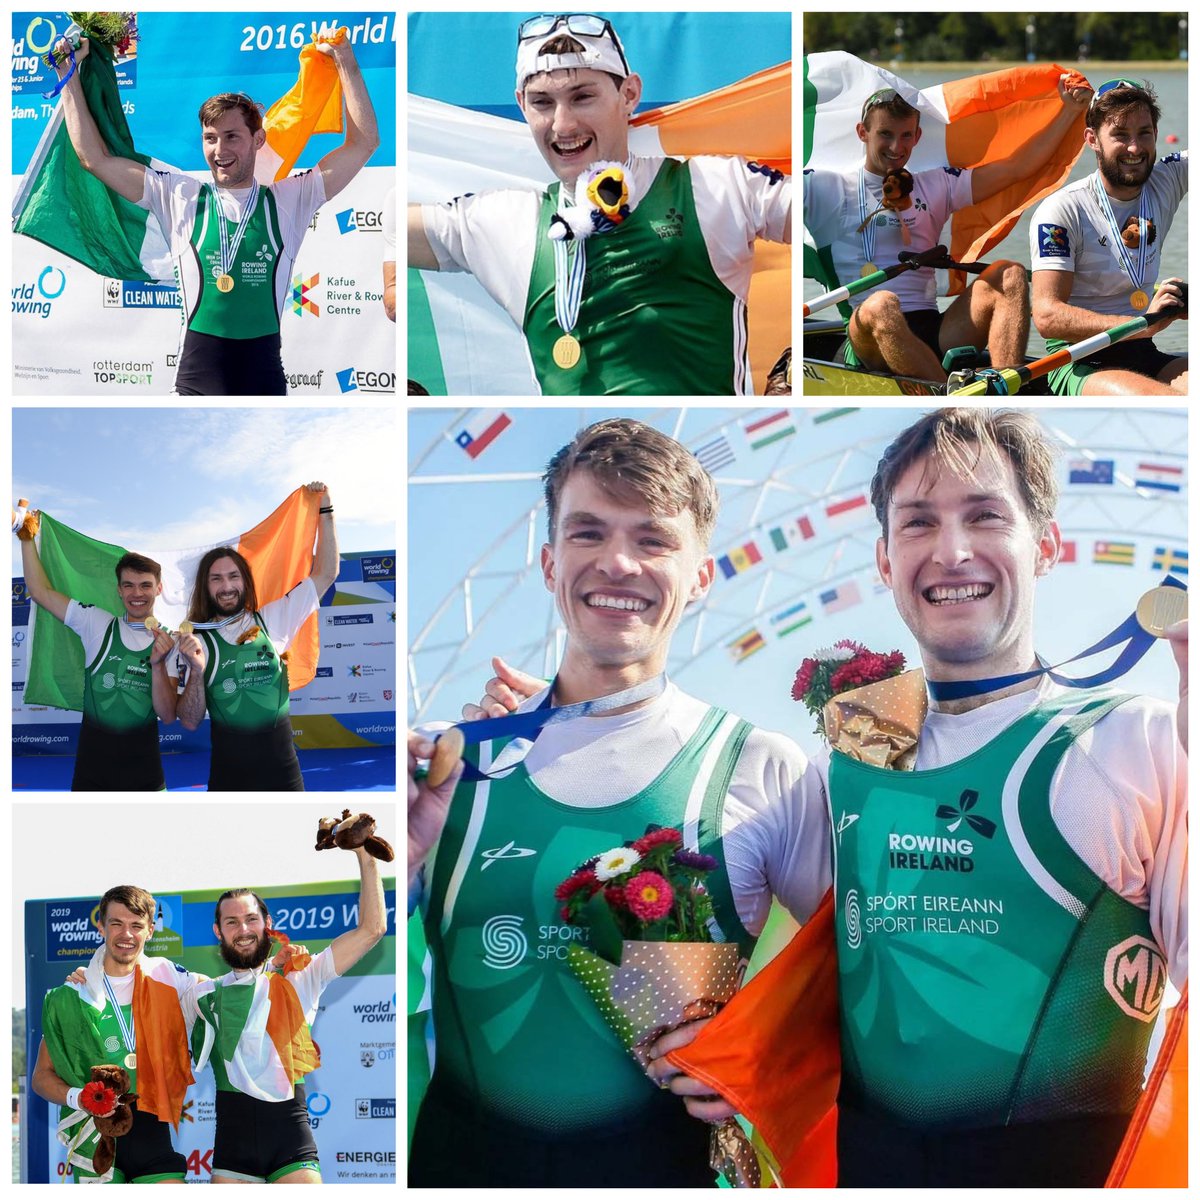 We need to talk about Paul O'Donovan again. Ireland's greatest-ever rower. He is now a six-time world rowing champion, not to mention an Olympic gold & silver medallist. Has won world gold in the single (2) & double (4), the last three with Fintan McCarthy, before that with Gary